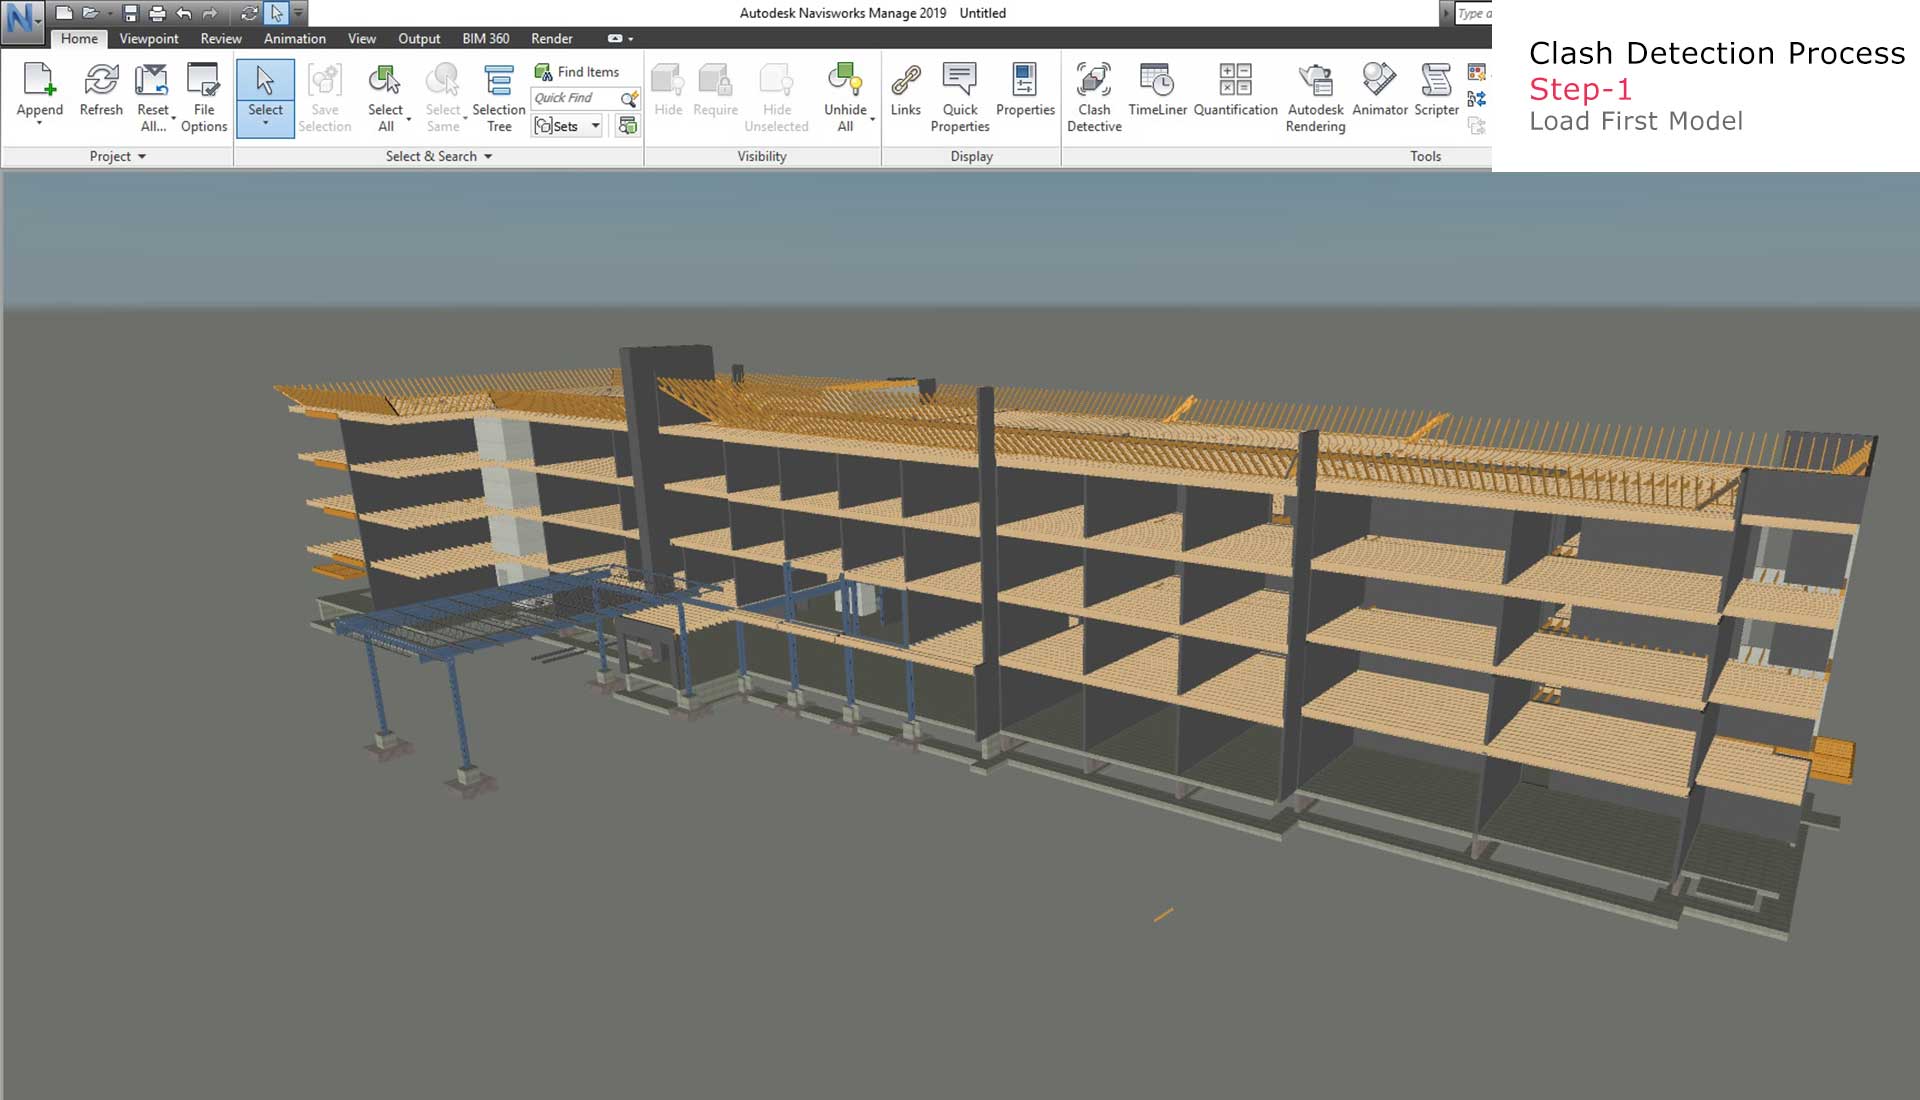 All About Clash Detection with Navisworks - United-BIM